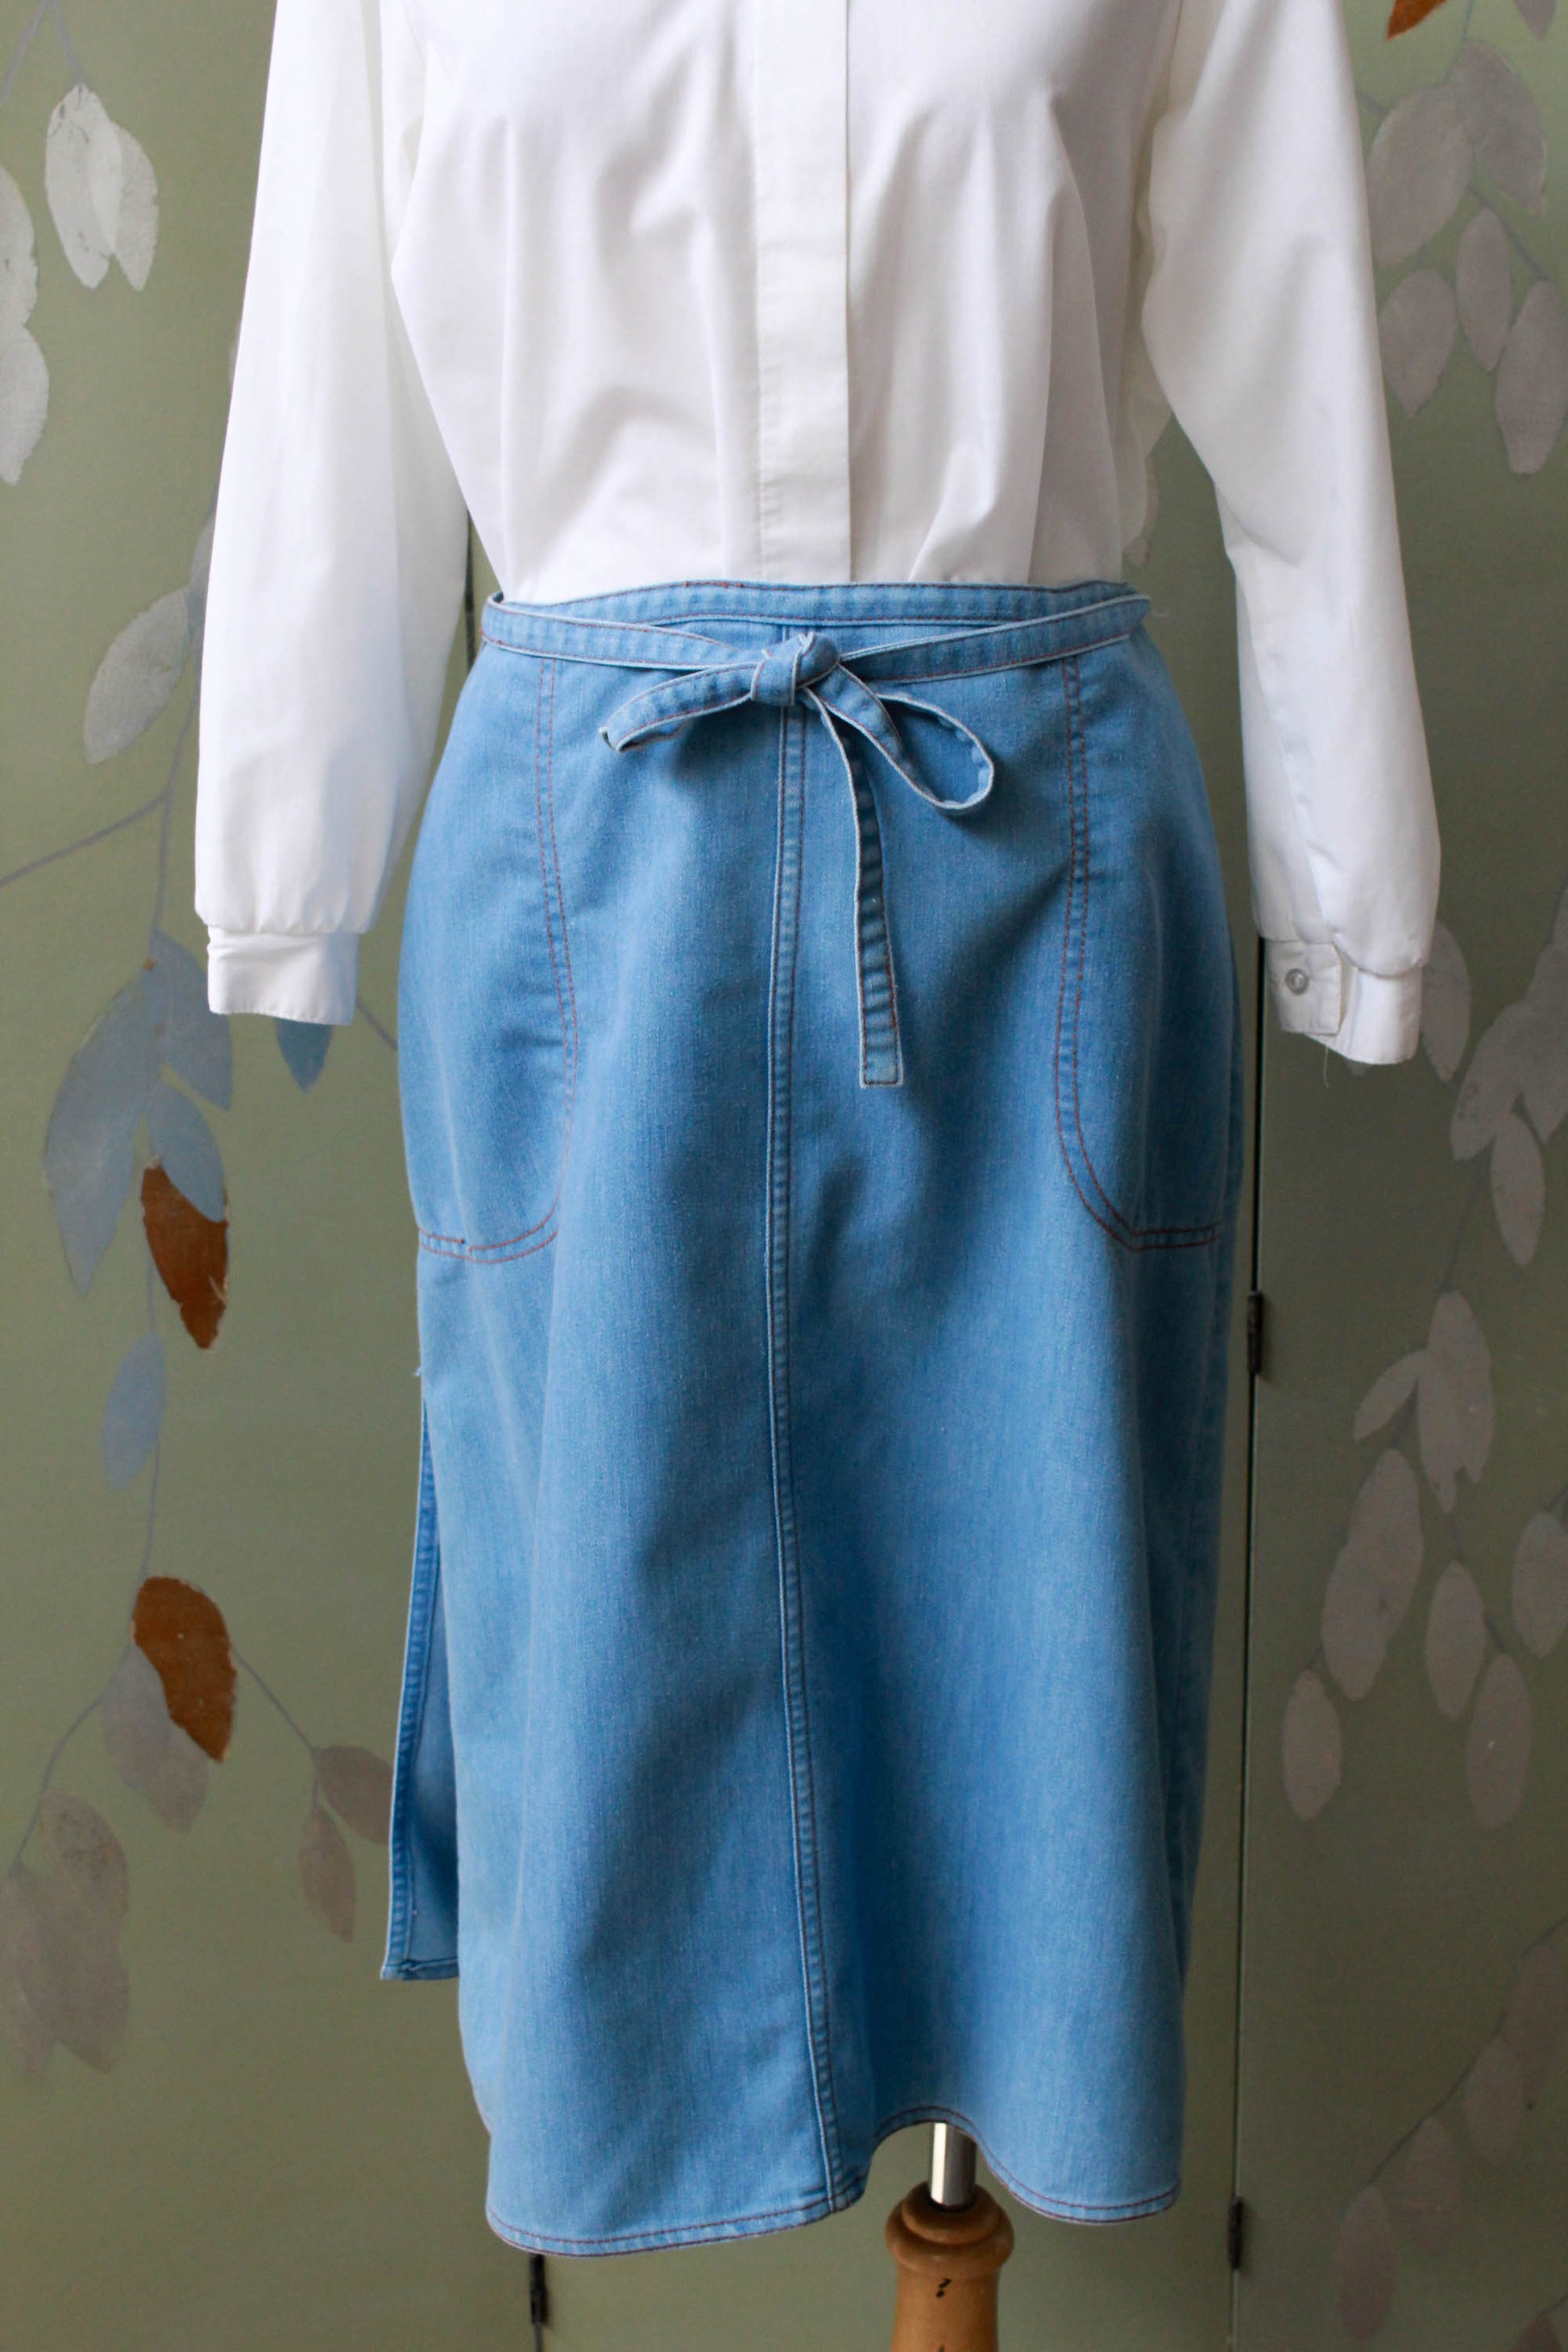 90s vintage chambray light blue jean wrap skirt with waist tie, side pockets, a-line silhouette